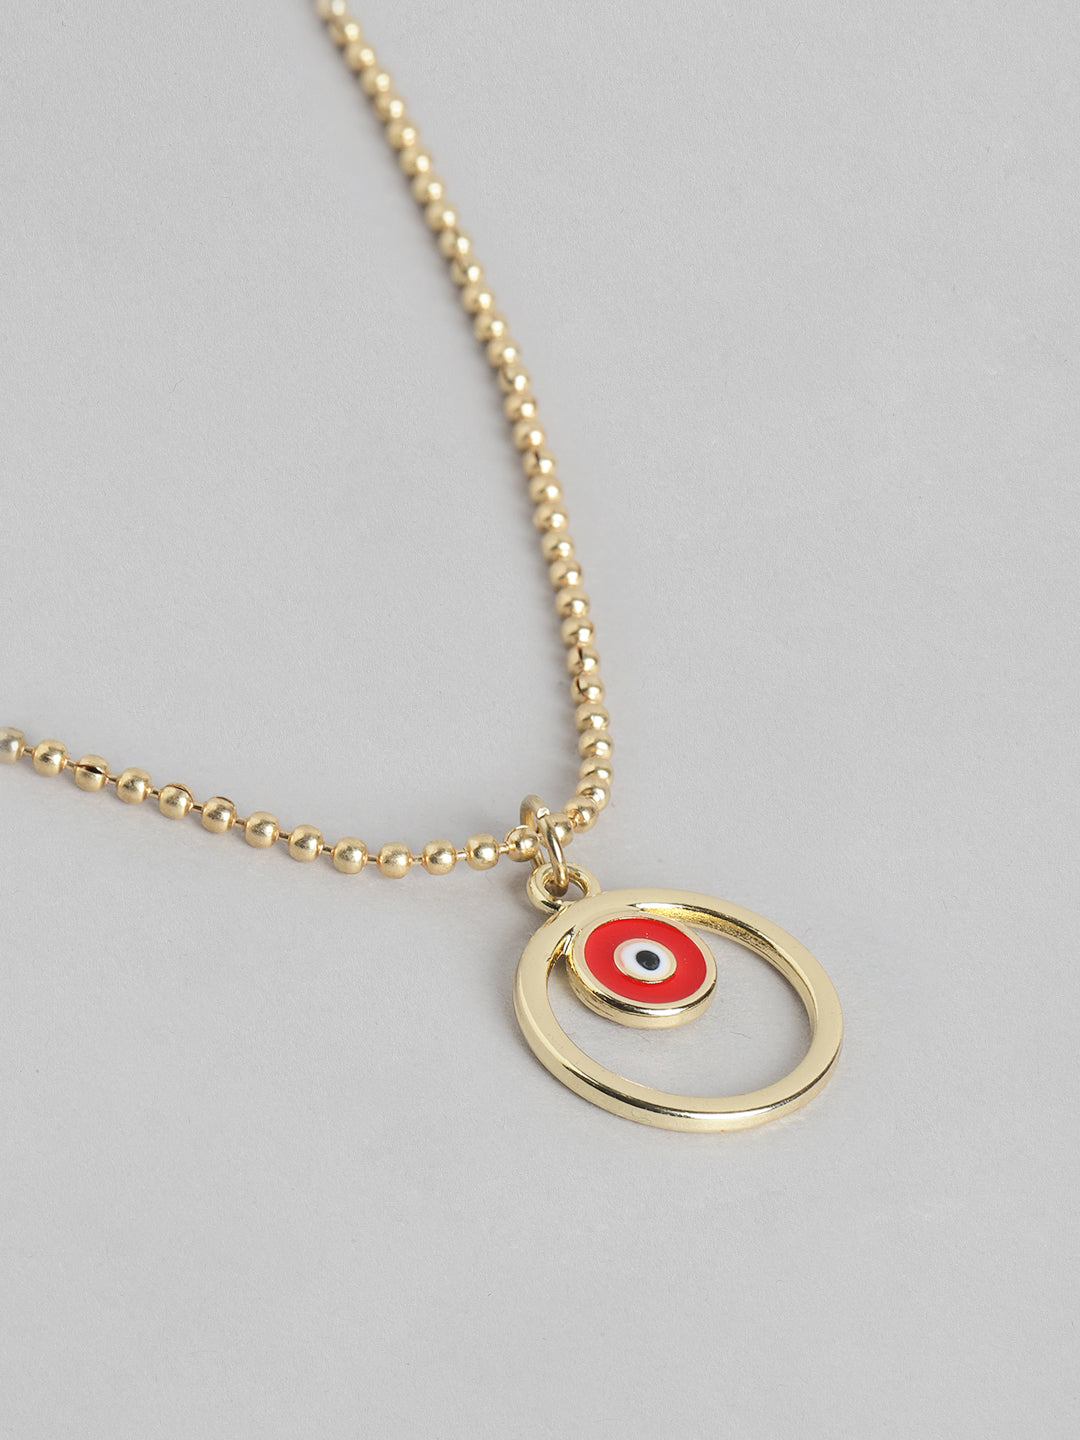 Blueberry Evil Eye pendant detailing layered chain necklace